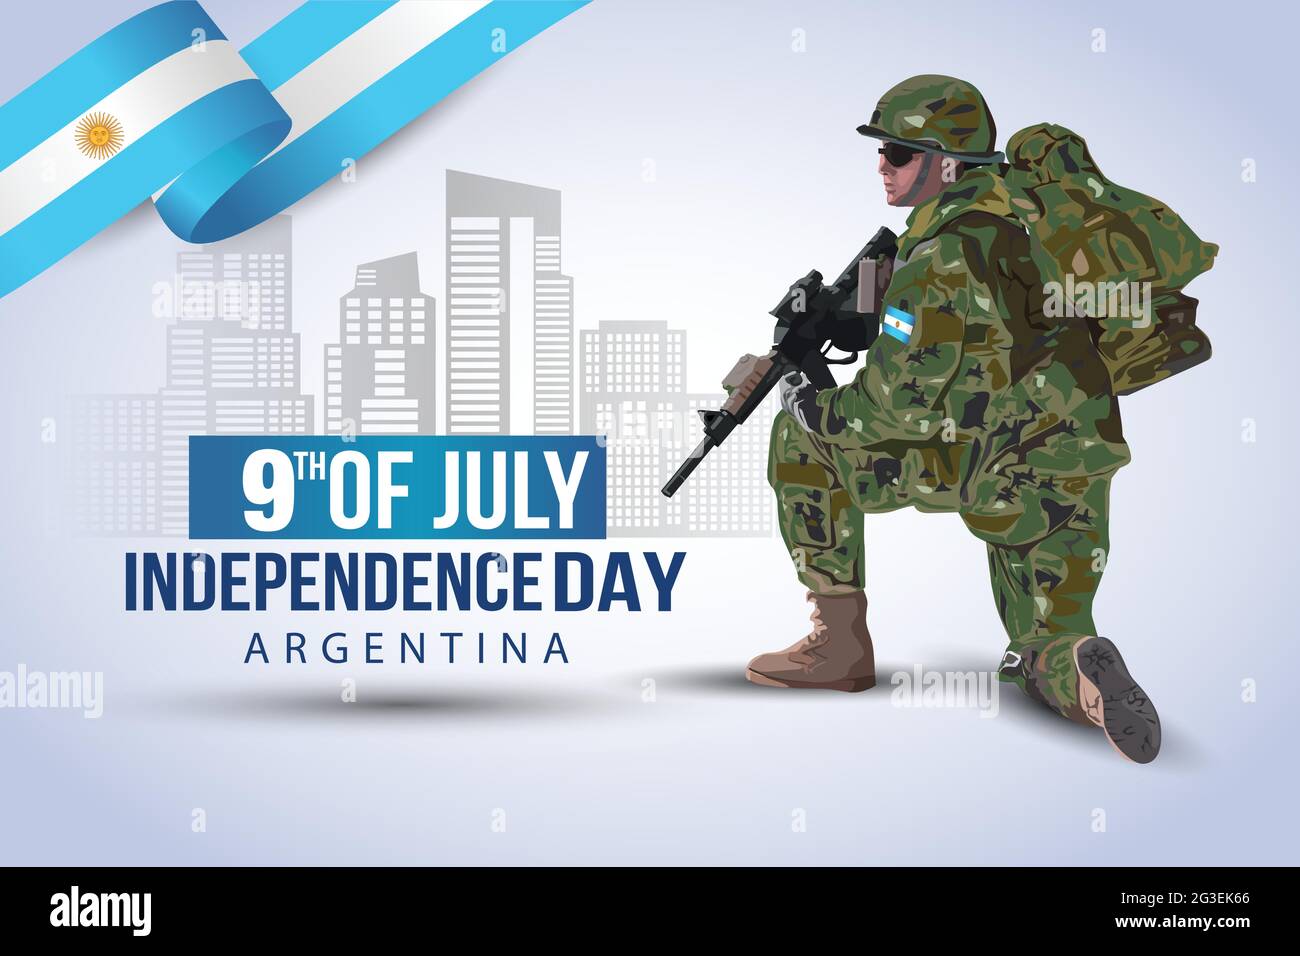 happy independence day Argentina 9th of July background. a soldier with gun and flag. Vector illustration design. Stock Vector